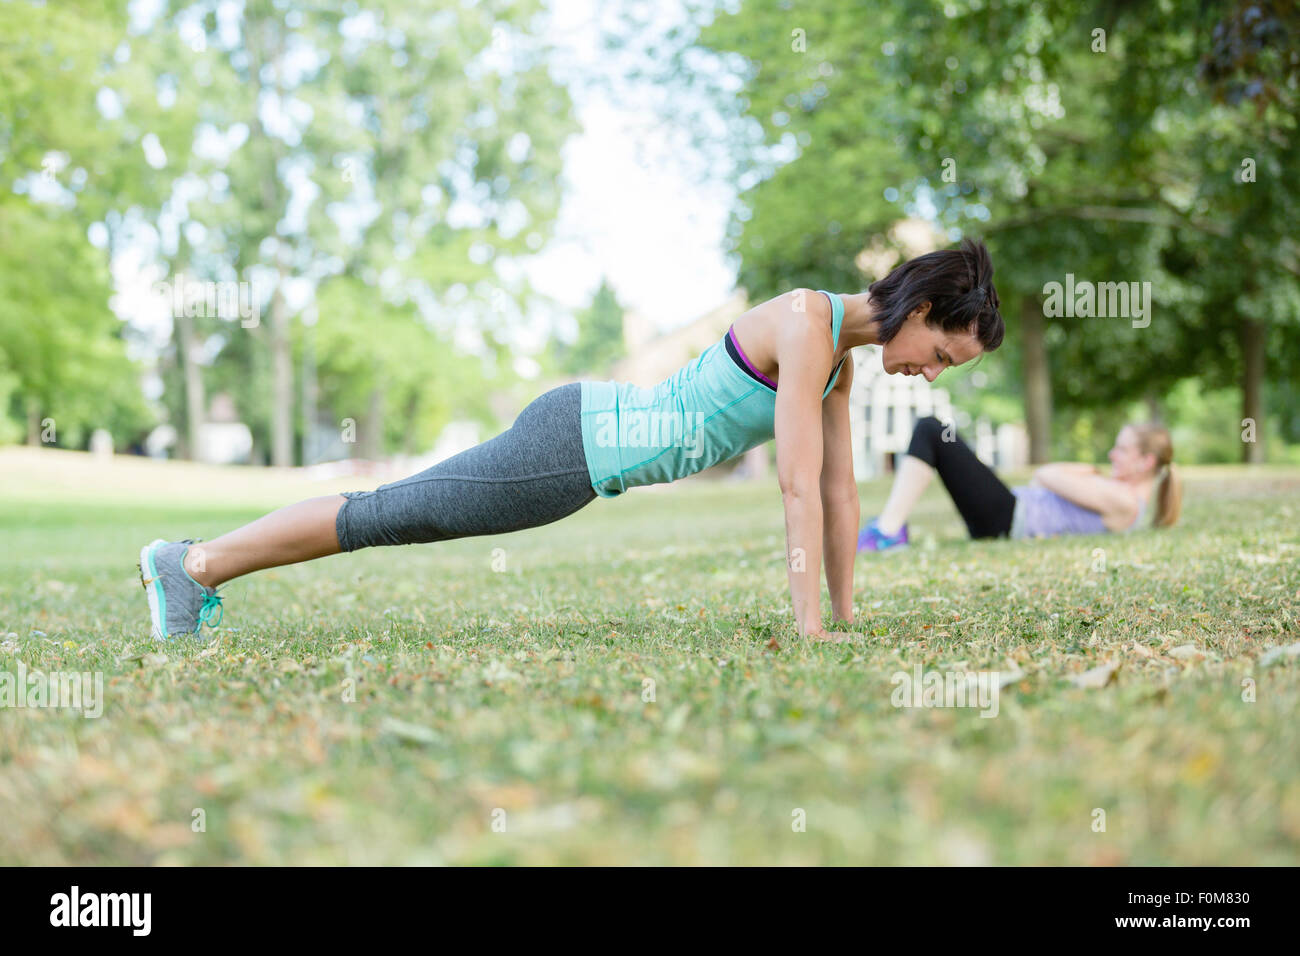 Two women during strength training Stock Photo